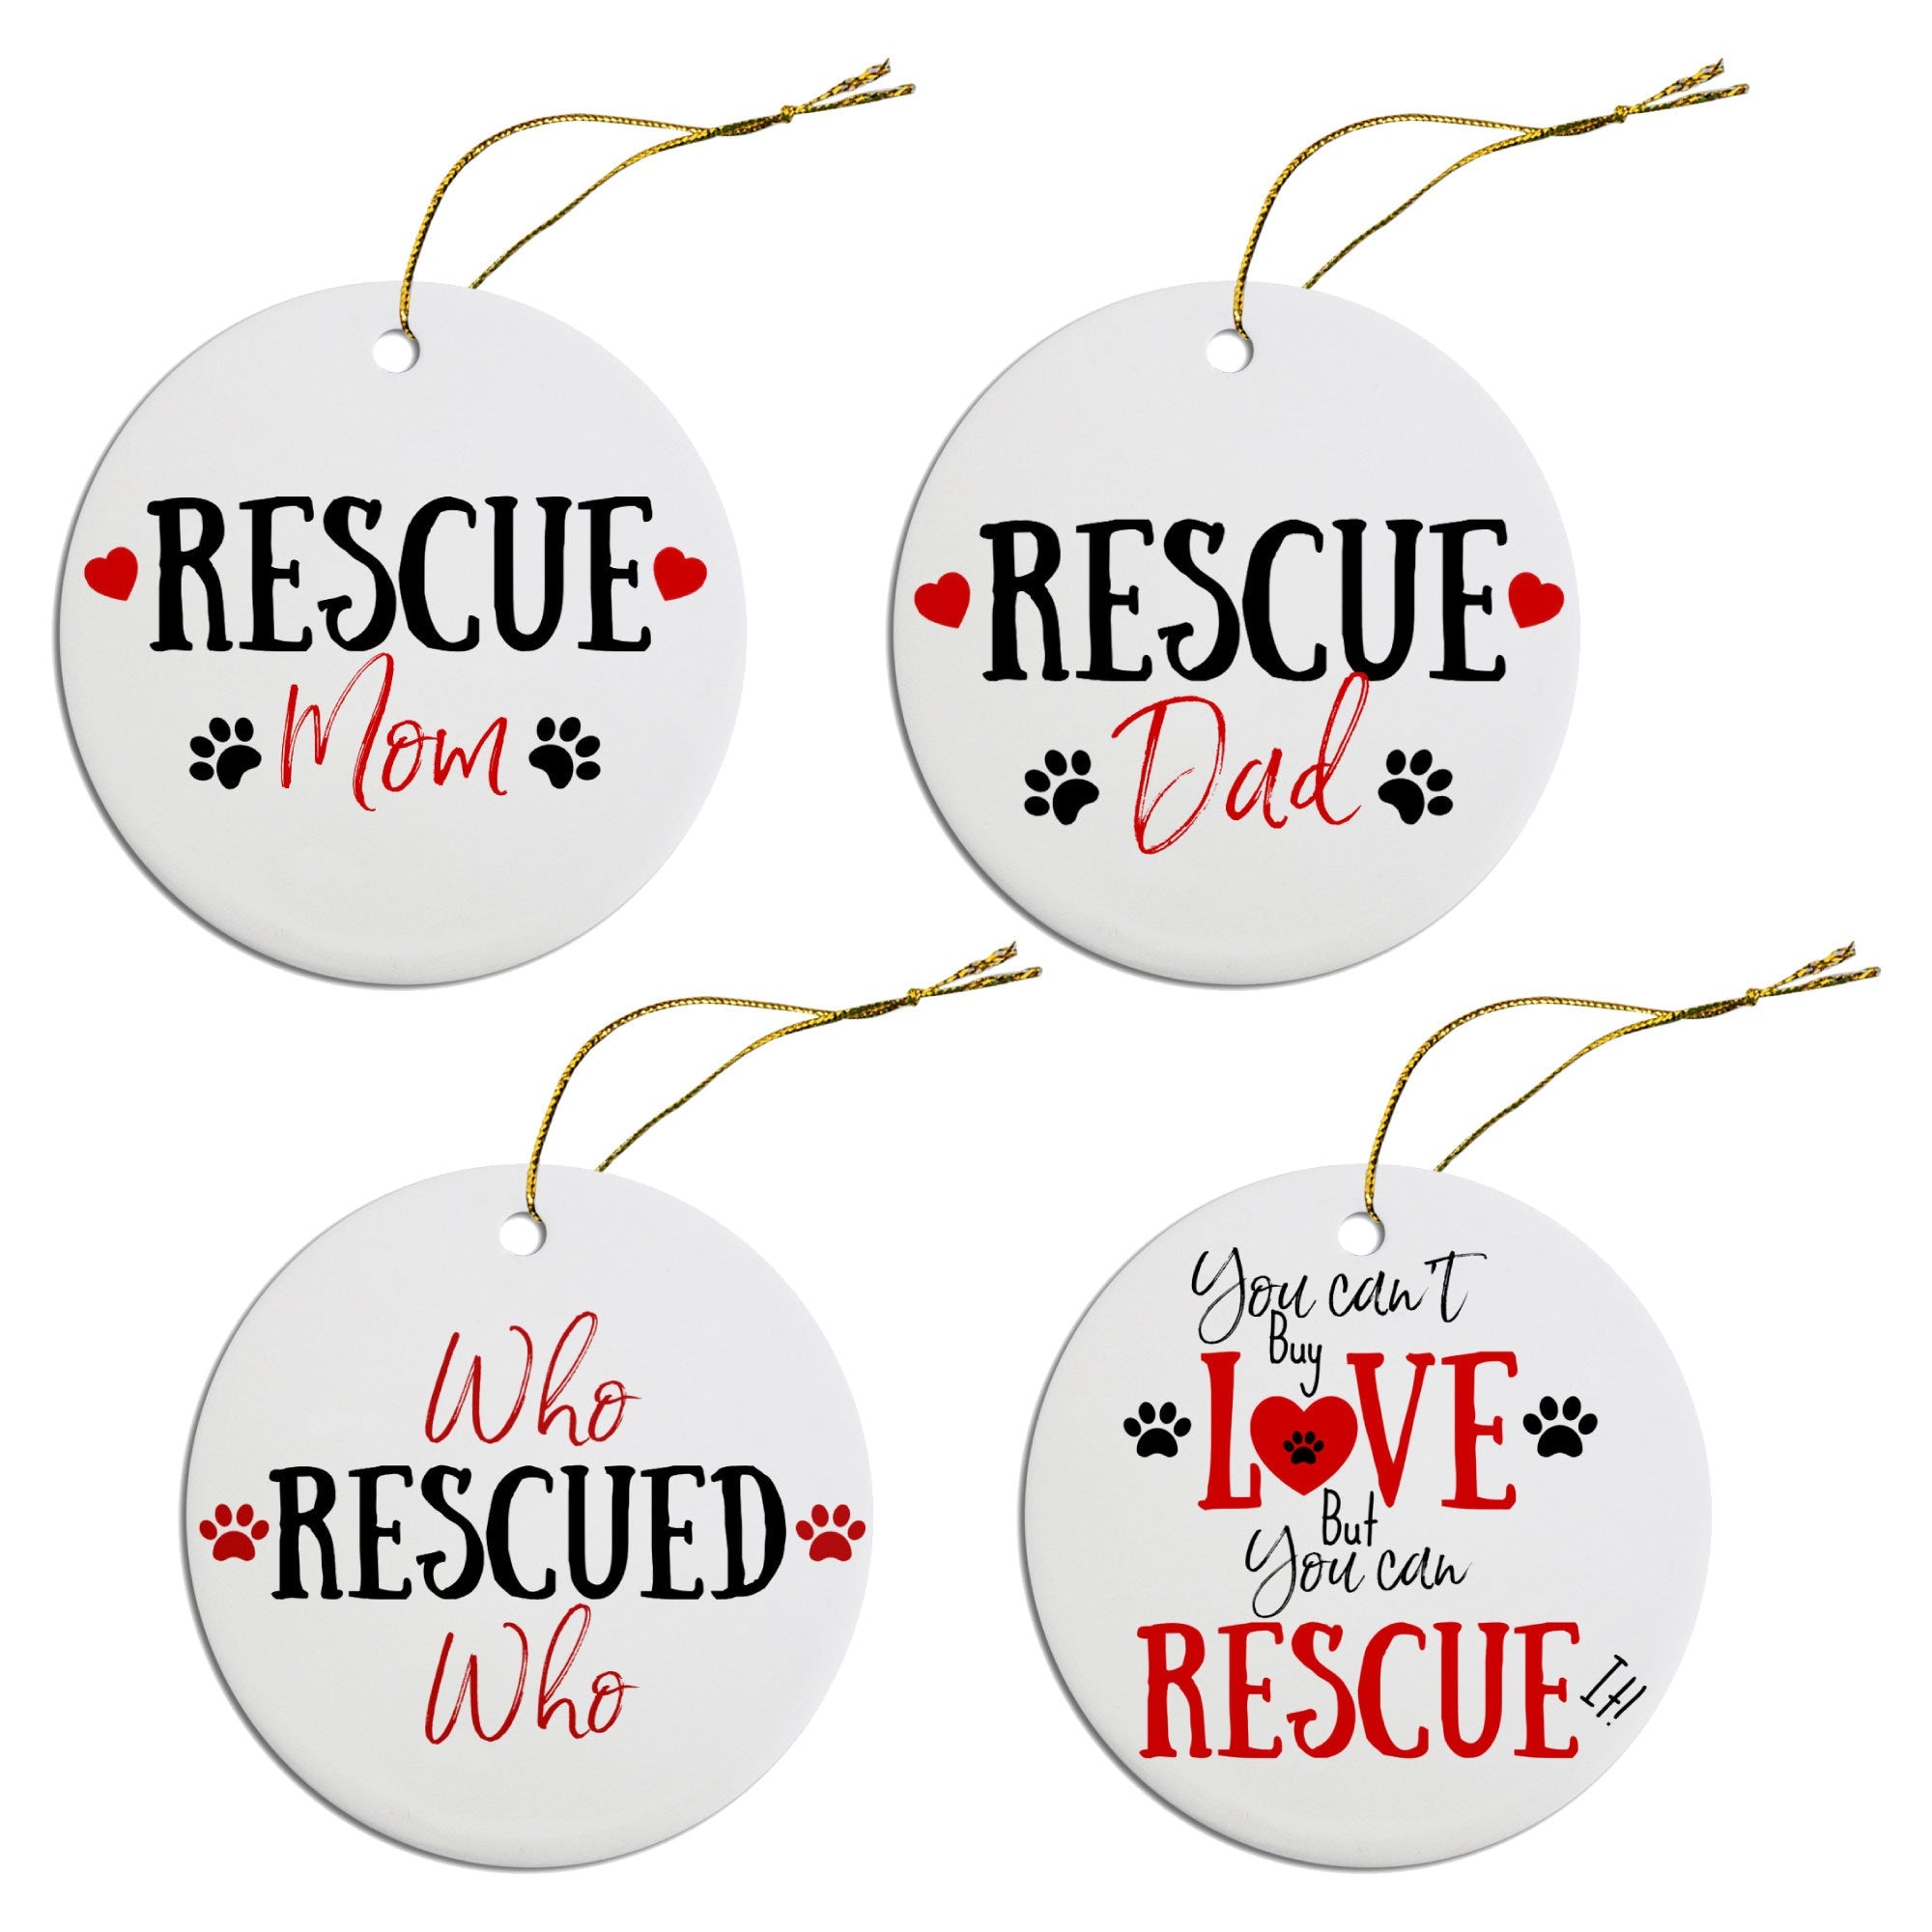 Holiday Fun Christmas Ornaments (Choose from 4 designs: Rescue Mom, Rescue Dad, Who Rescued Who?, You Can&#39;t Buy Love, But You Can Rescue It)